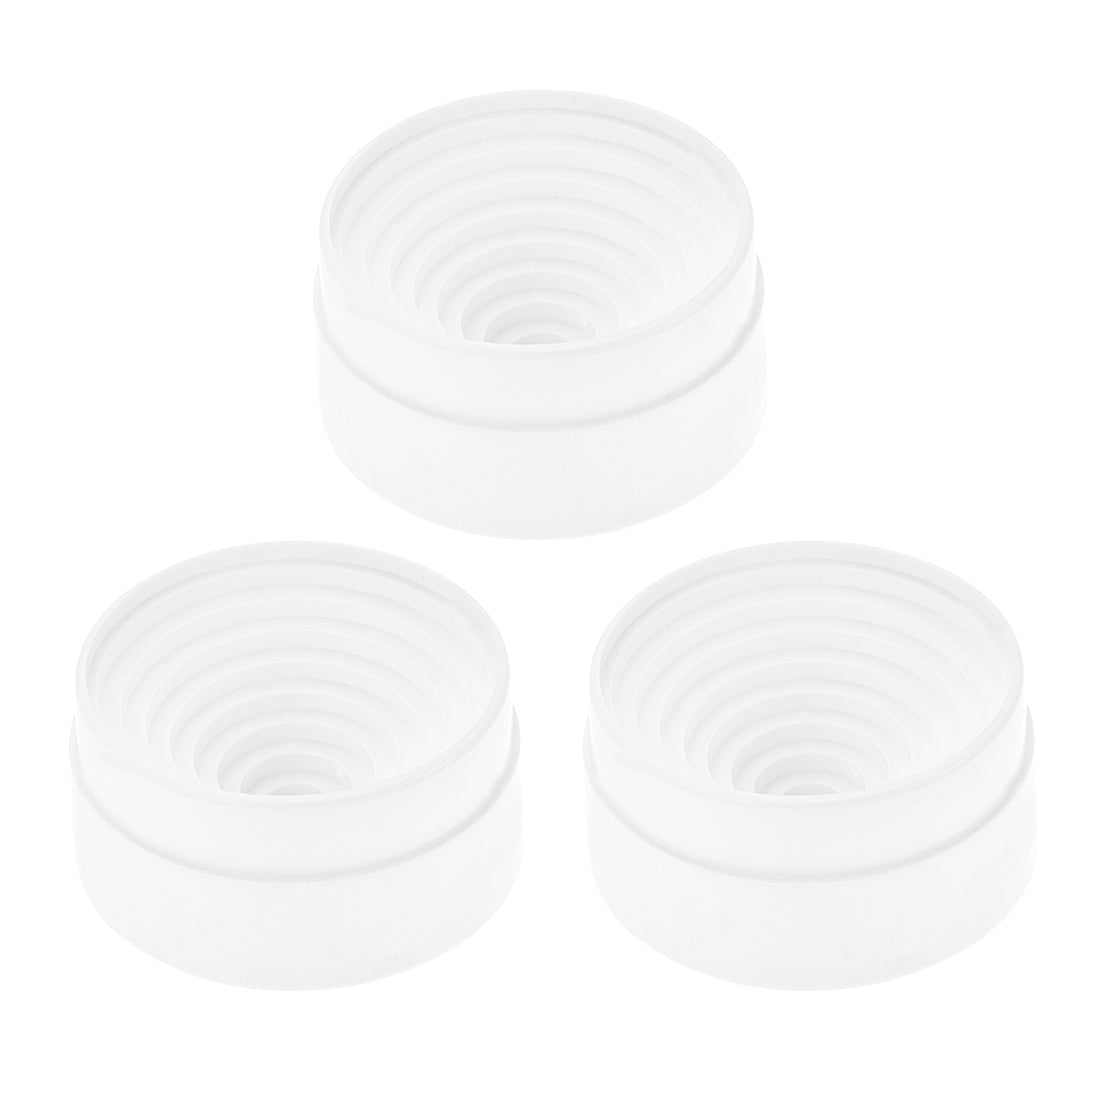 uxcell Uxcell Lab Flask Support Plastic Stand 90mm Diameter Round Bottom Holder for 50ml-1000ml Flasks White 3Pcs